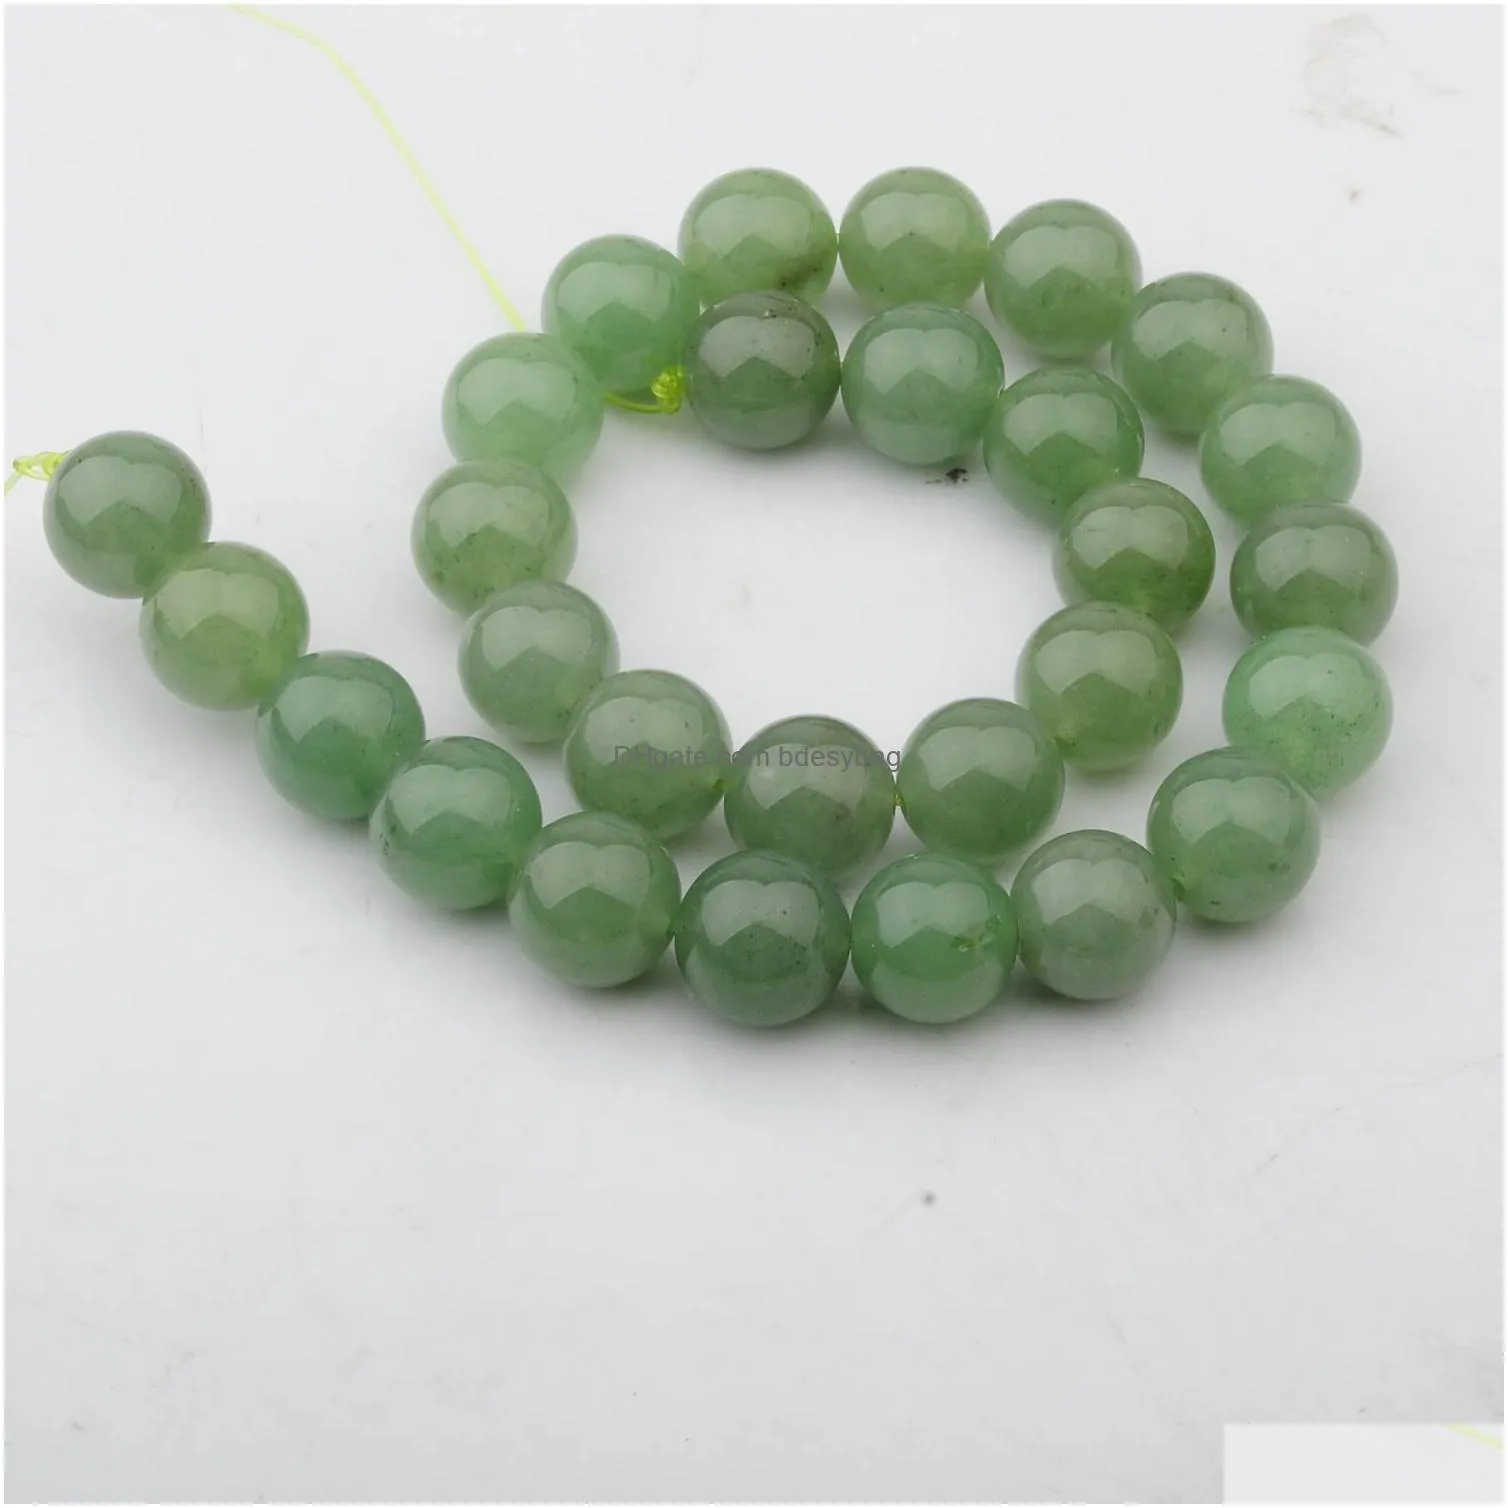 natural gemstone crystal 14mm aventurine round beads for diy making charm jewelry necklace bracelet loose 28pcs stone beads for